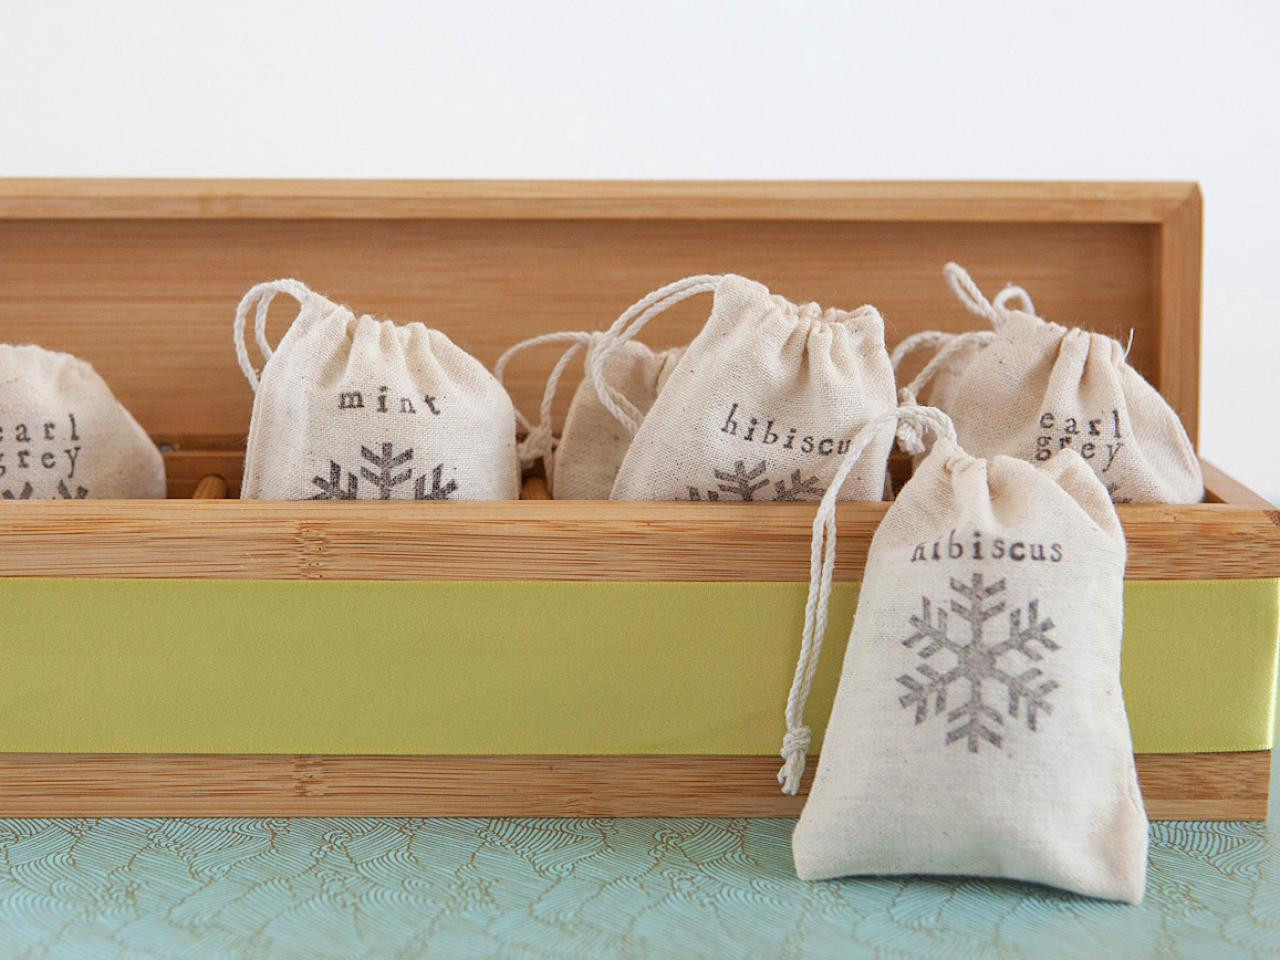 Tea Gift Baskets Ideas
 50 Creative DIY Gifts To Use For Any Occasion